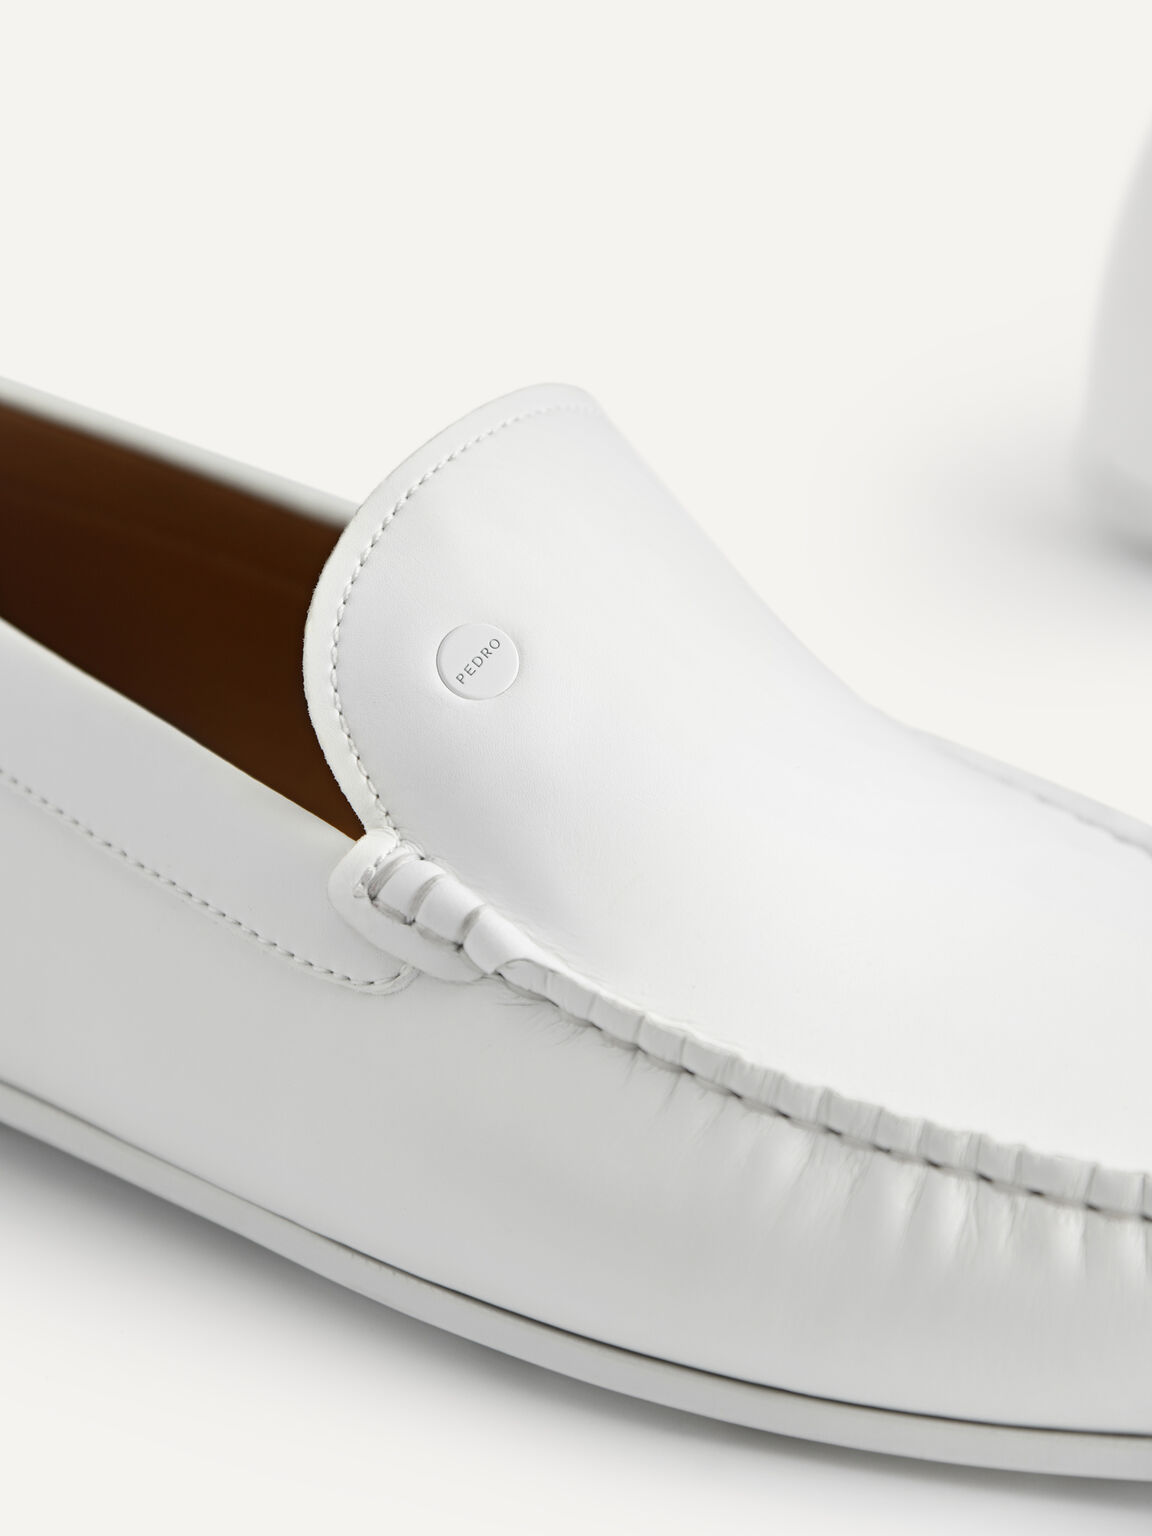 Casual Moccasins, White